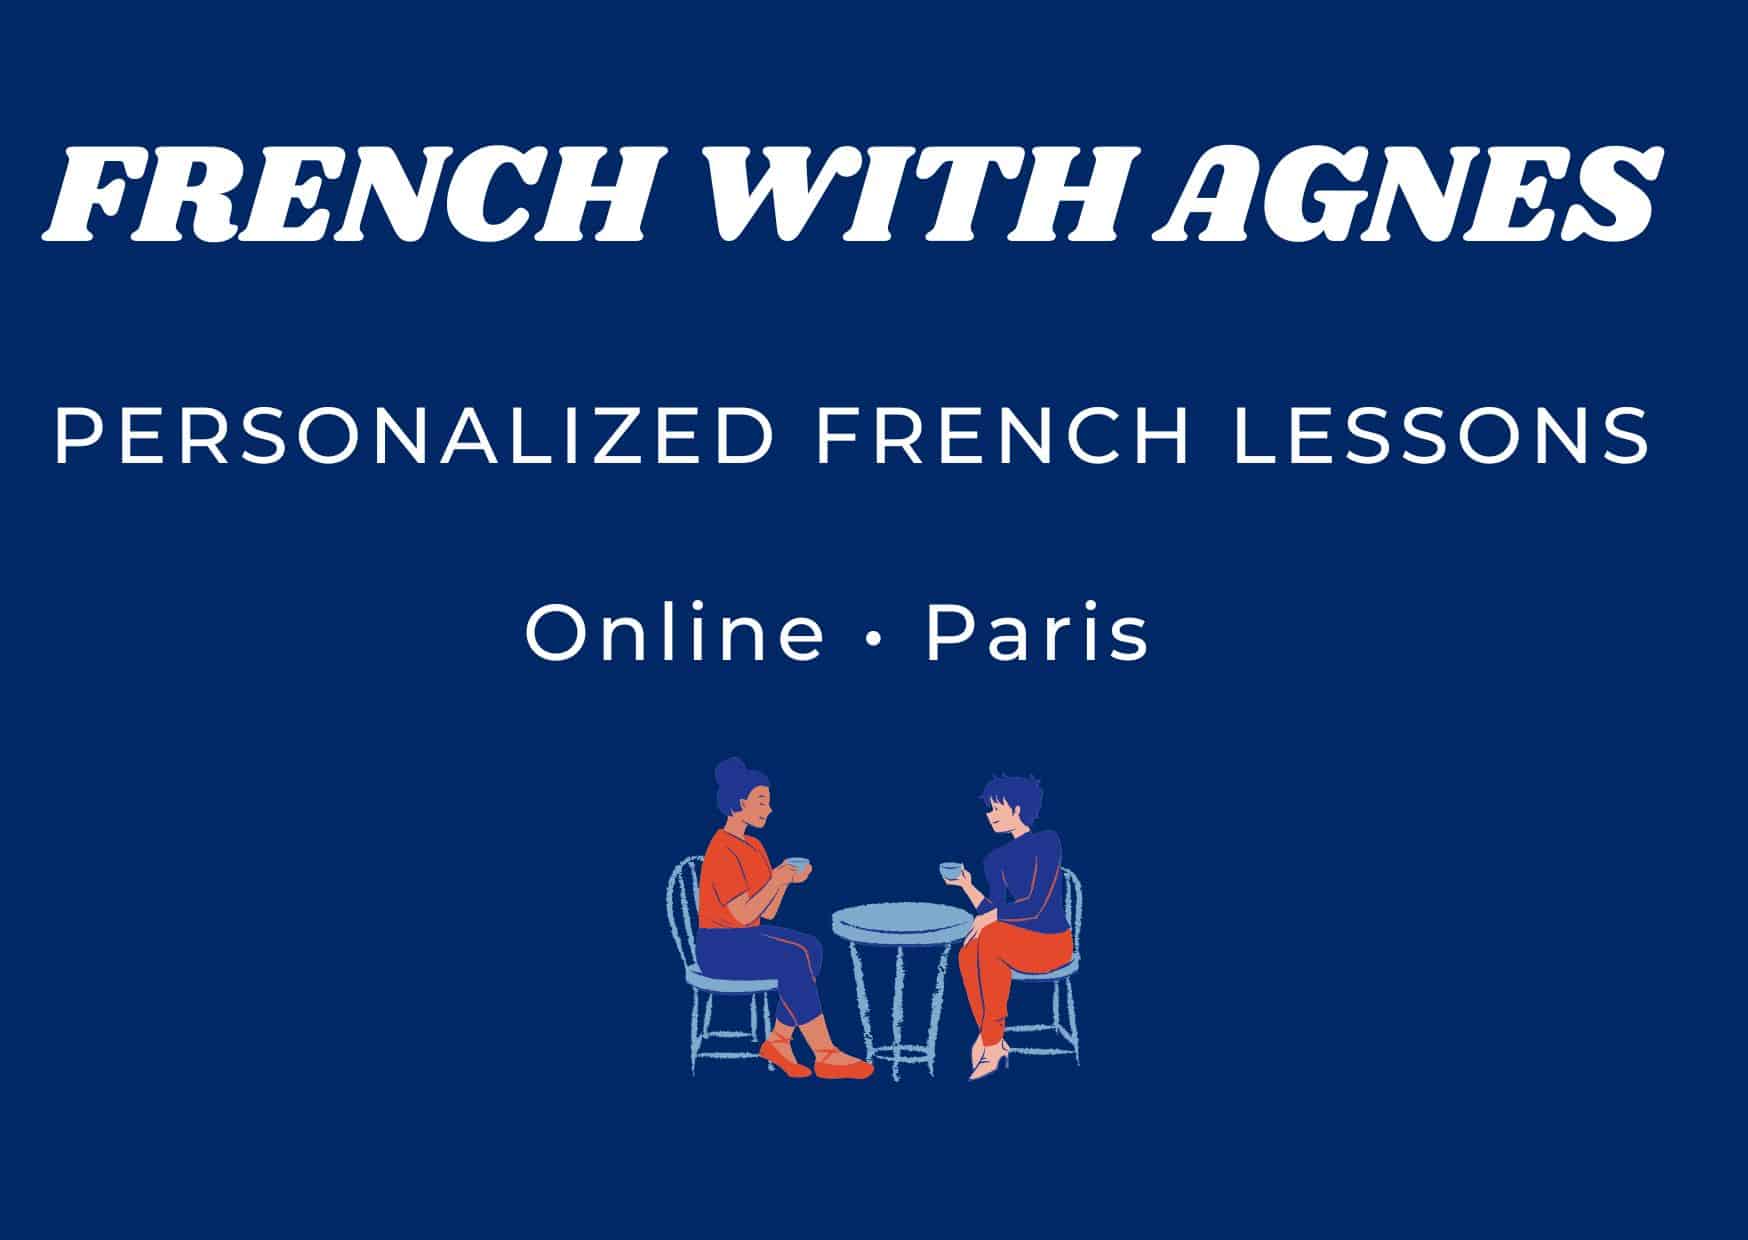 Do you say ‘jour’ or ‘journée’? | French with Agnes